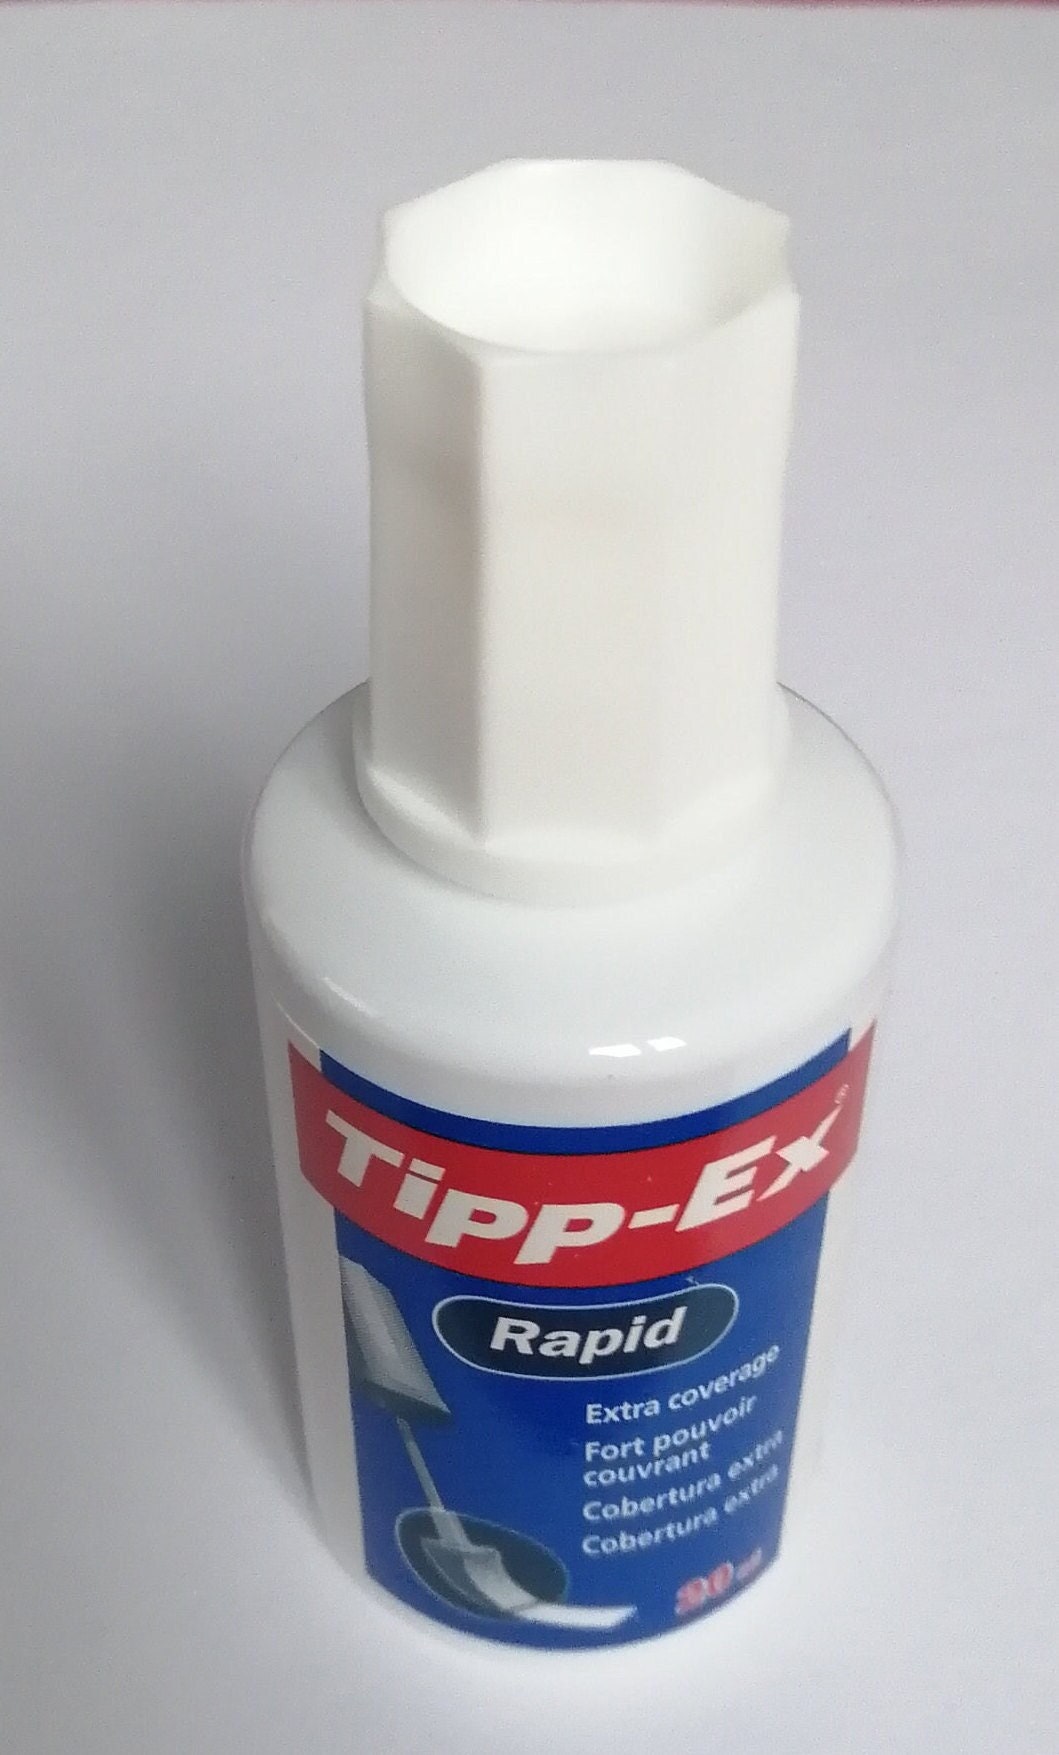  Tipp-Ex Rapid Correction Fluid - 20 ml, Box of 2 : Office  Products